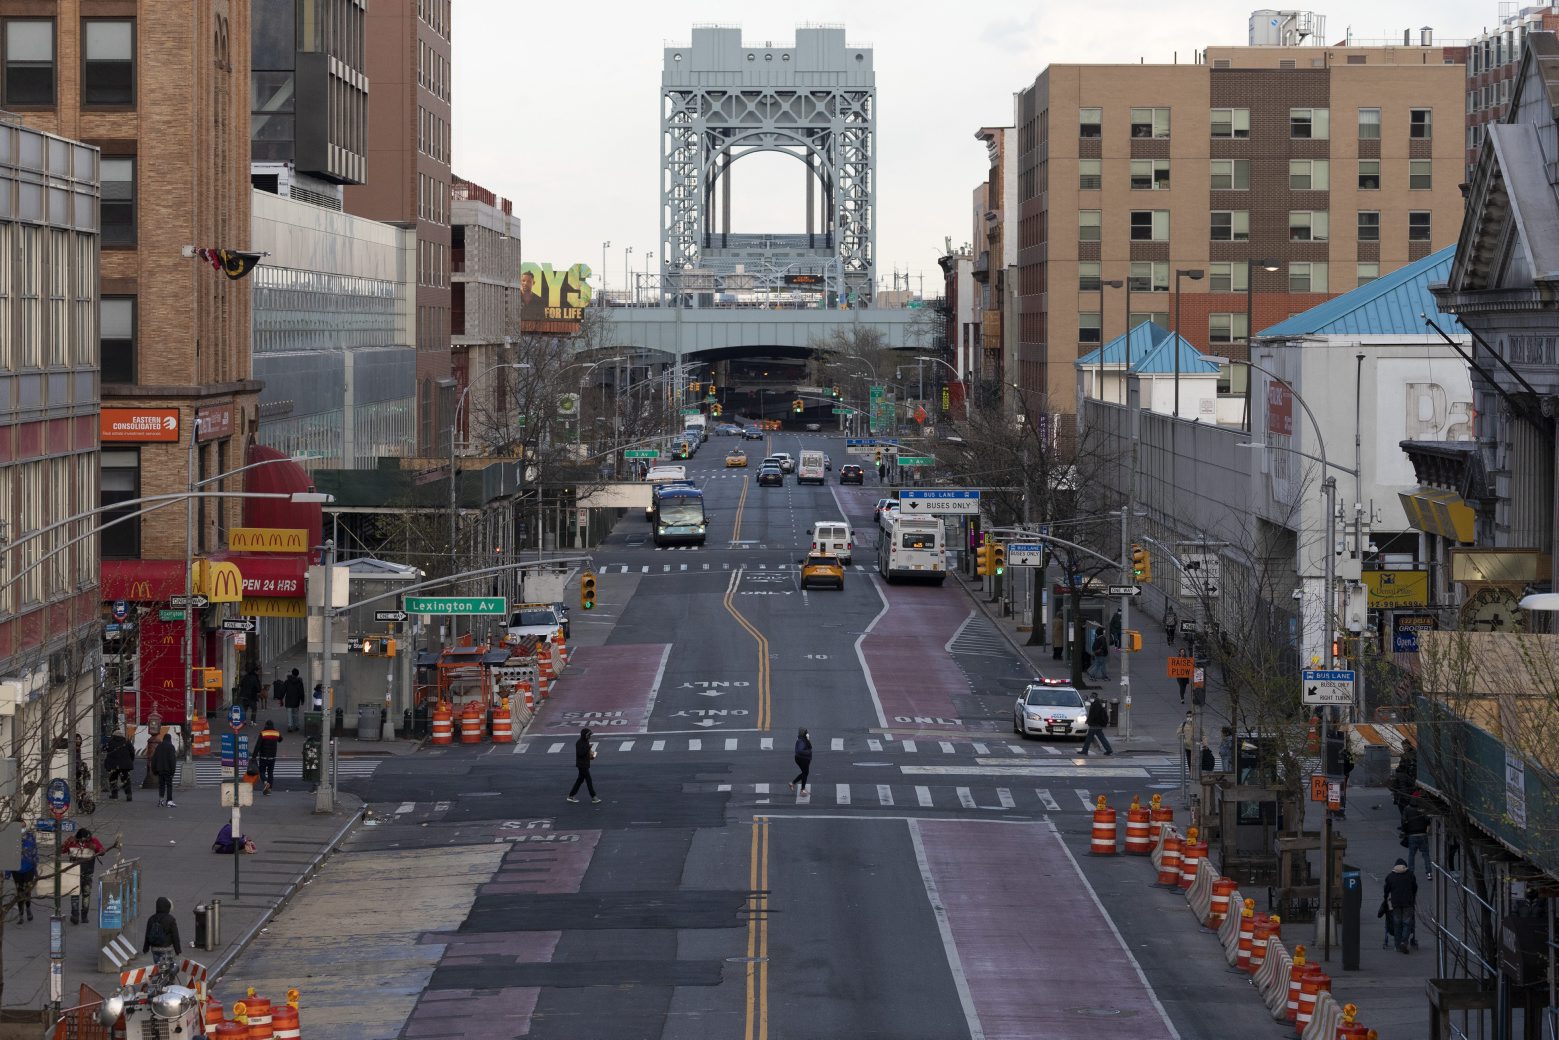 There is little traffic on 125th Street, Thursday, April 16, 2020, in the Harlem neighborhood of New York during the coronavirus pandemic. Gov. Andrew Cuomo extended stay-at-home restrictions Thursday through mid-May. (AP Photo/Mark Lennihan) Virus Outbreak New York